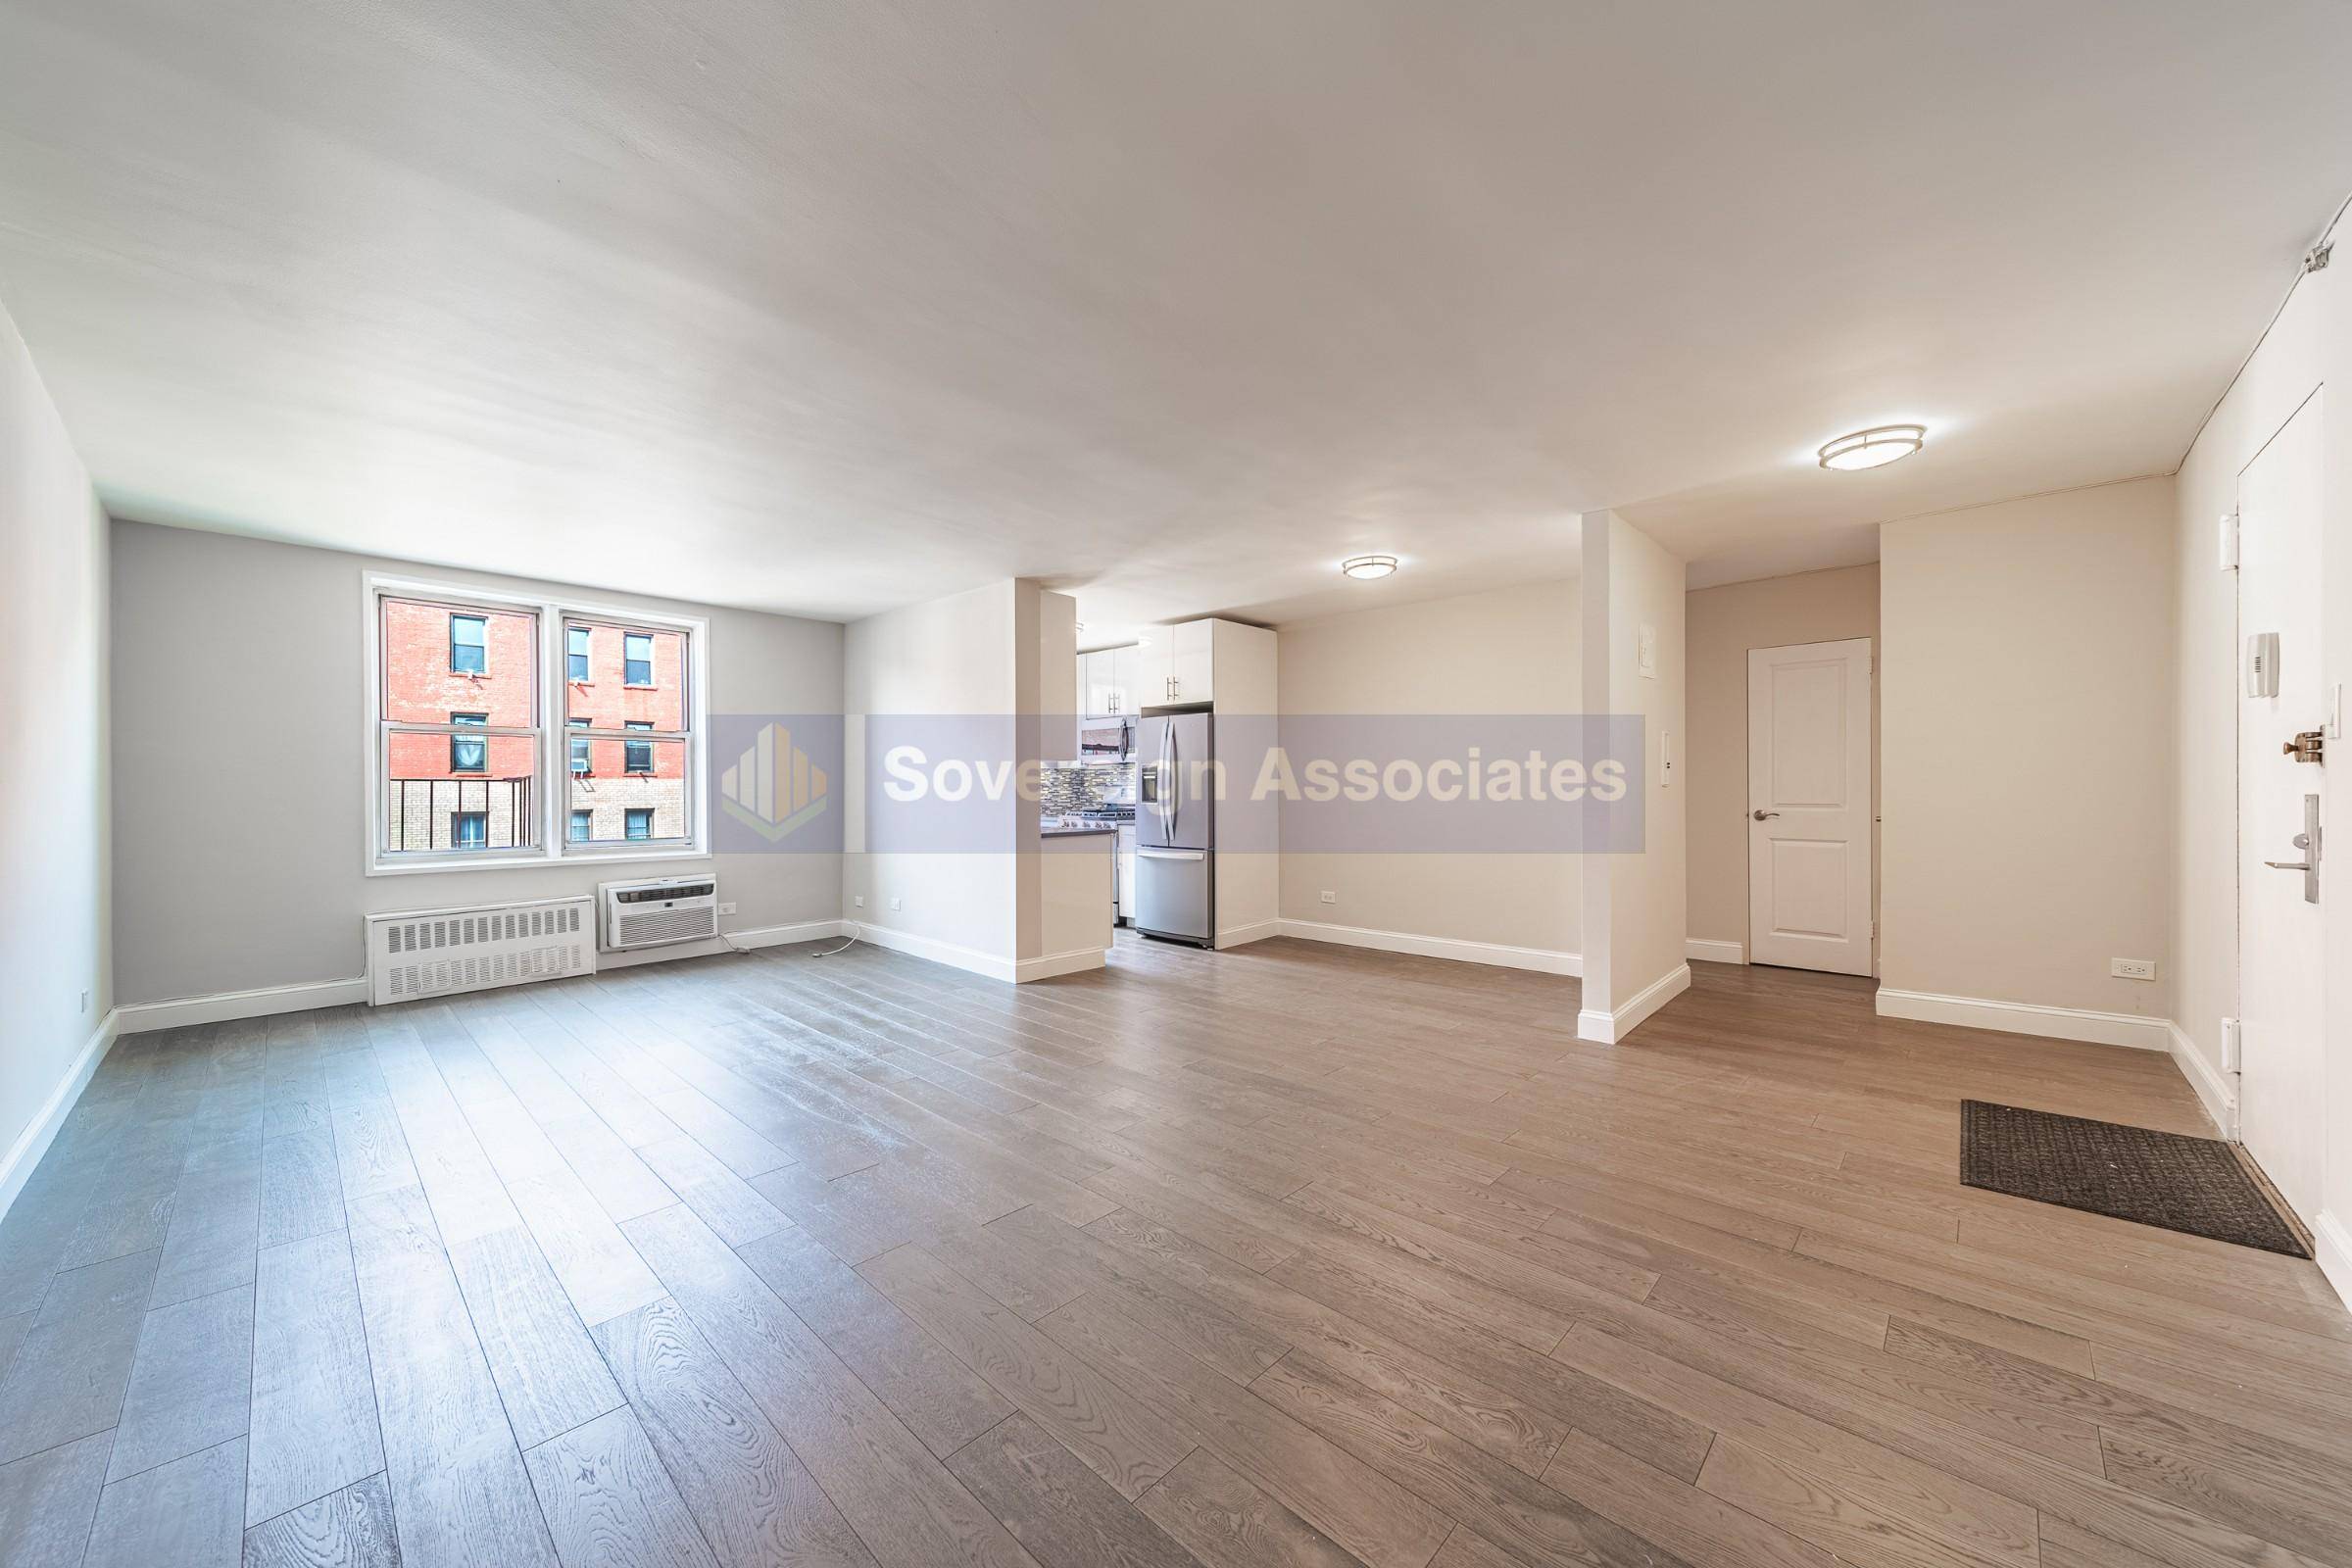 Are you hunting for a large, top floor, fully renovated, very sunny one bedroom in a doorman building with a view of the George Washington Bridge weird but true ?